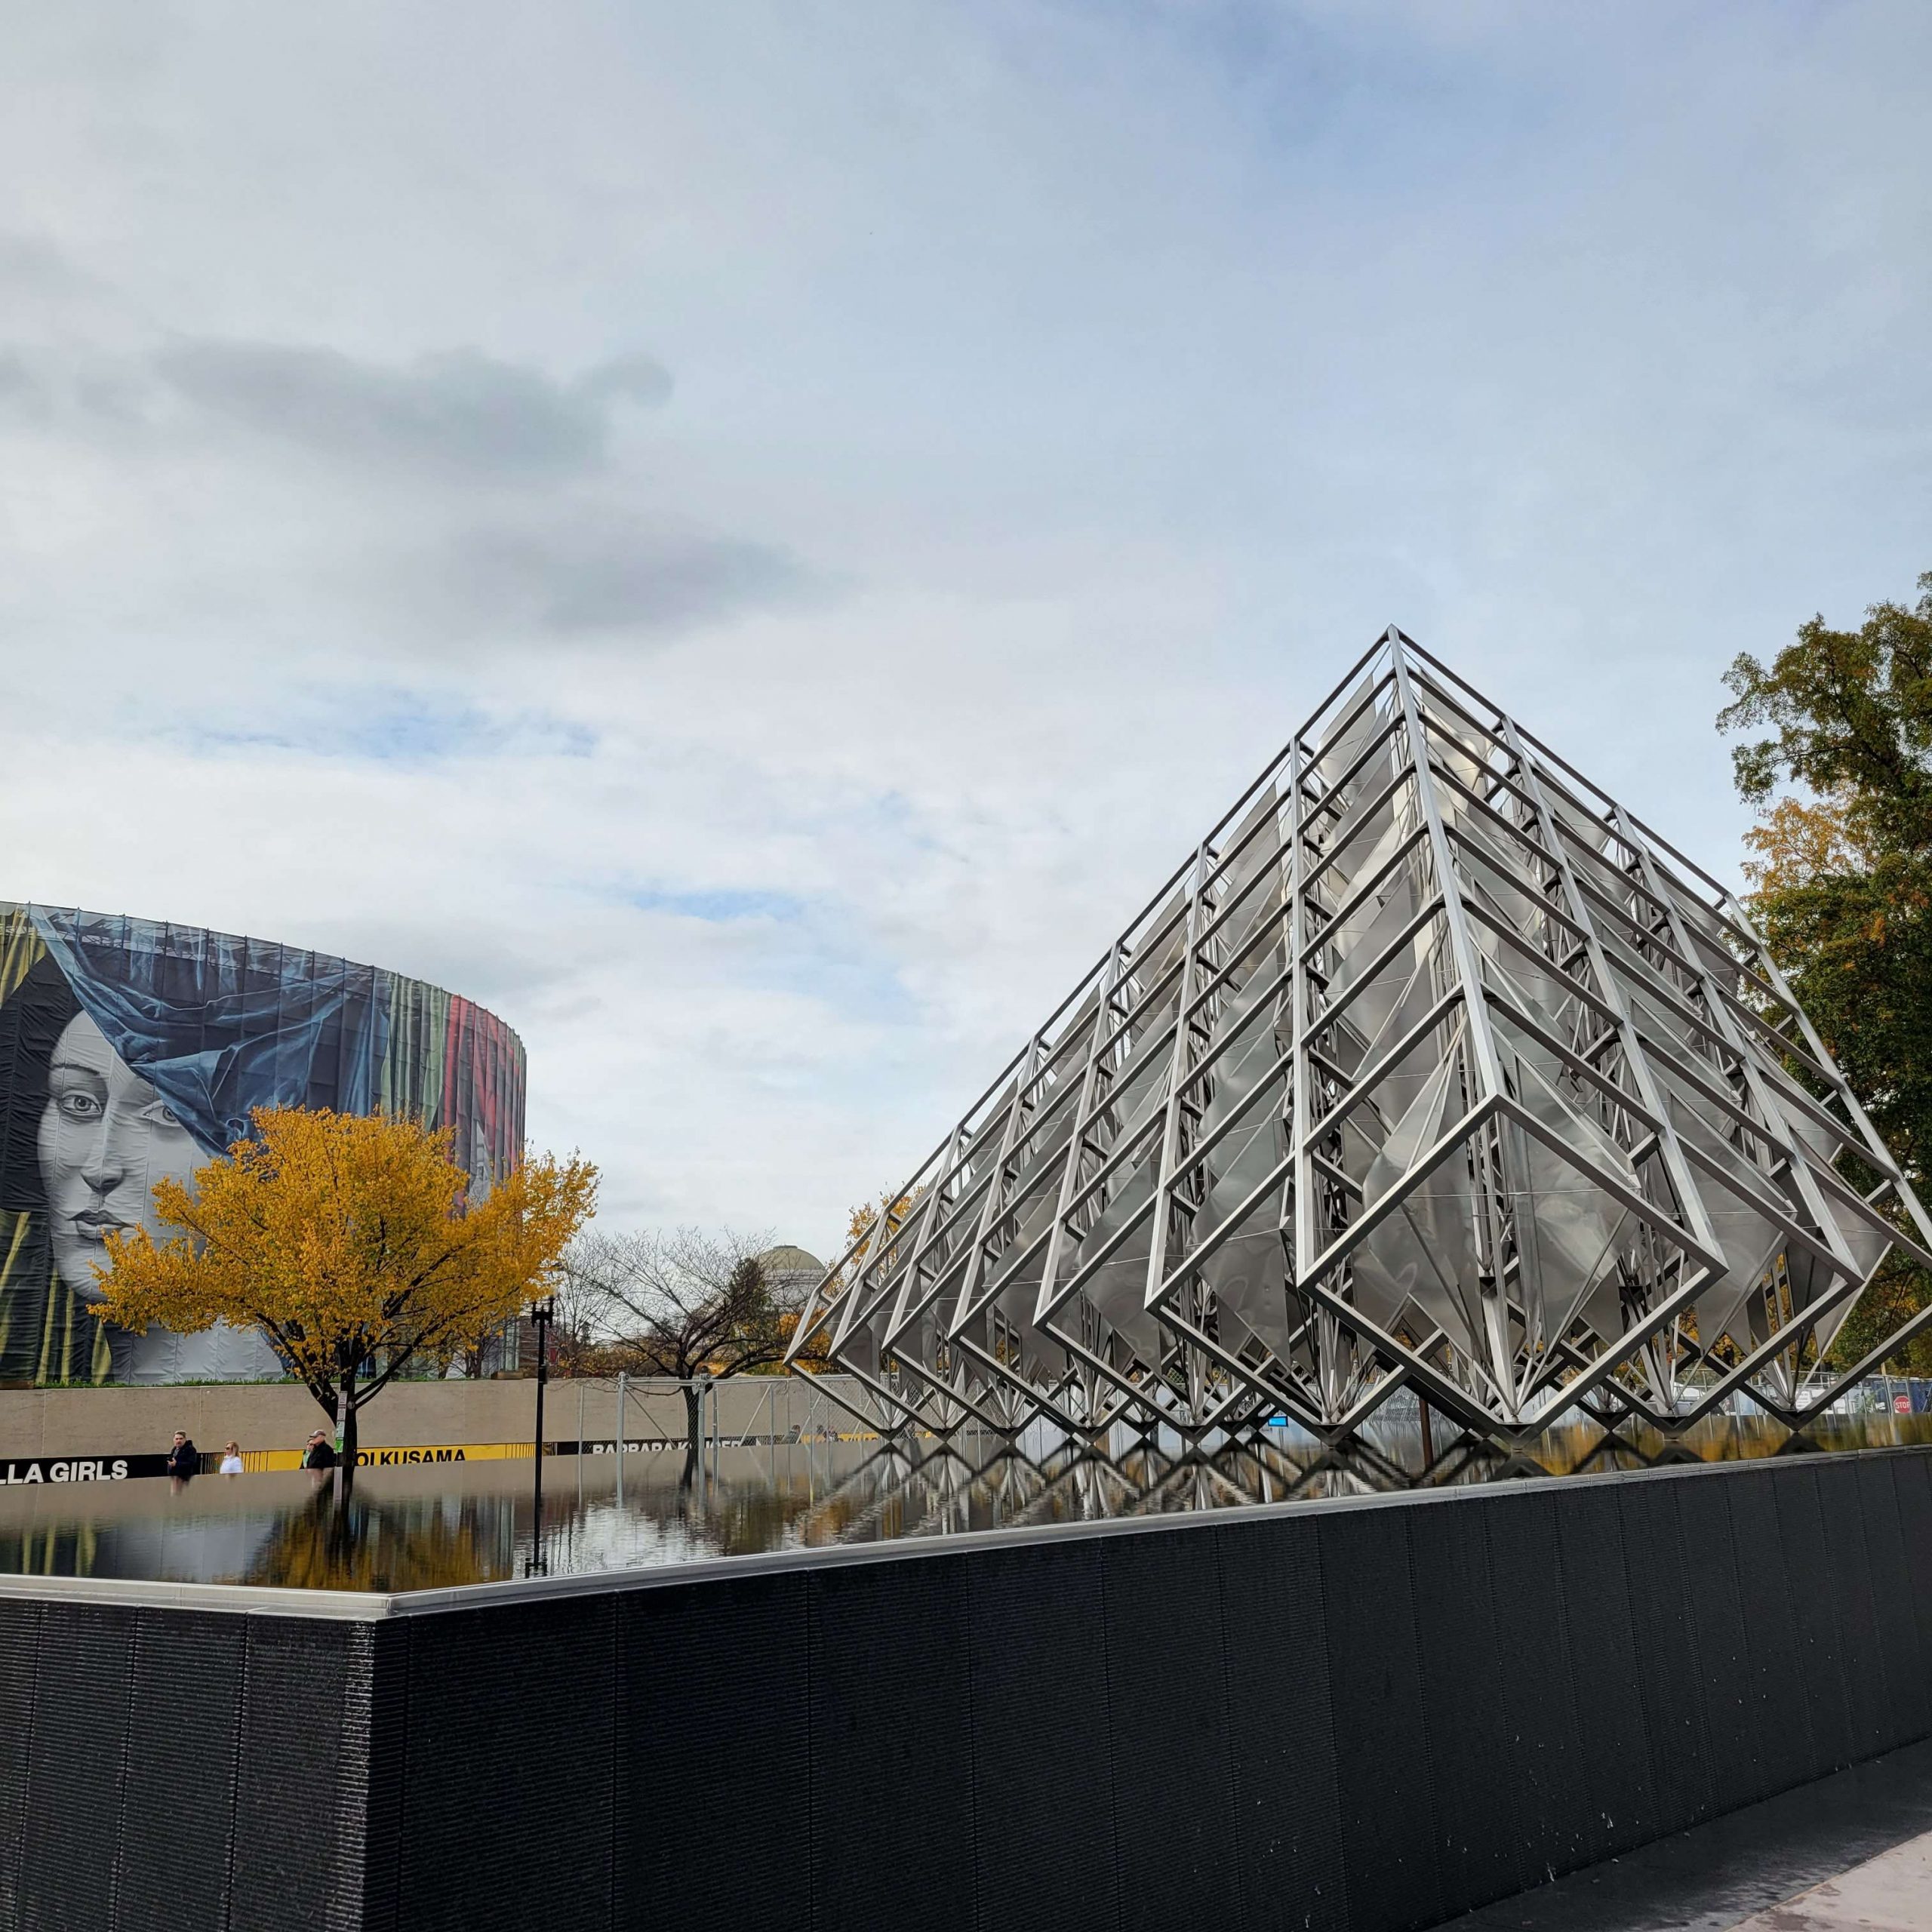 A silver modern triangular sculpture in front of the Smithsonian National Air and Space Museum.Photo by The Signal Reporter Karsyn Coxie.